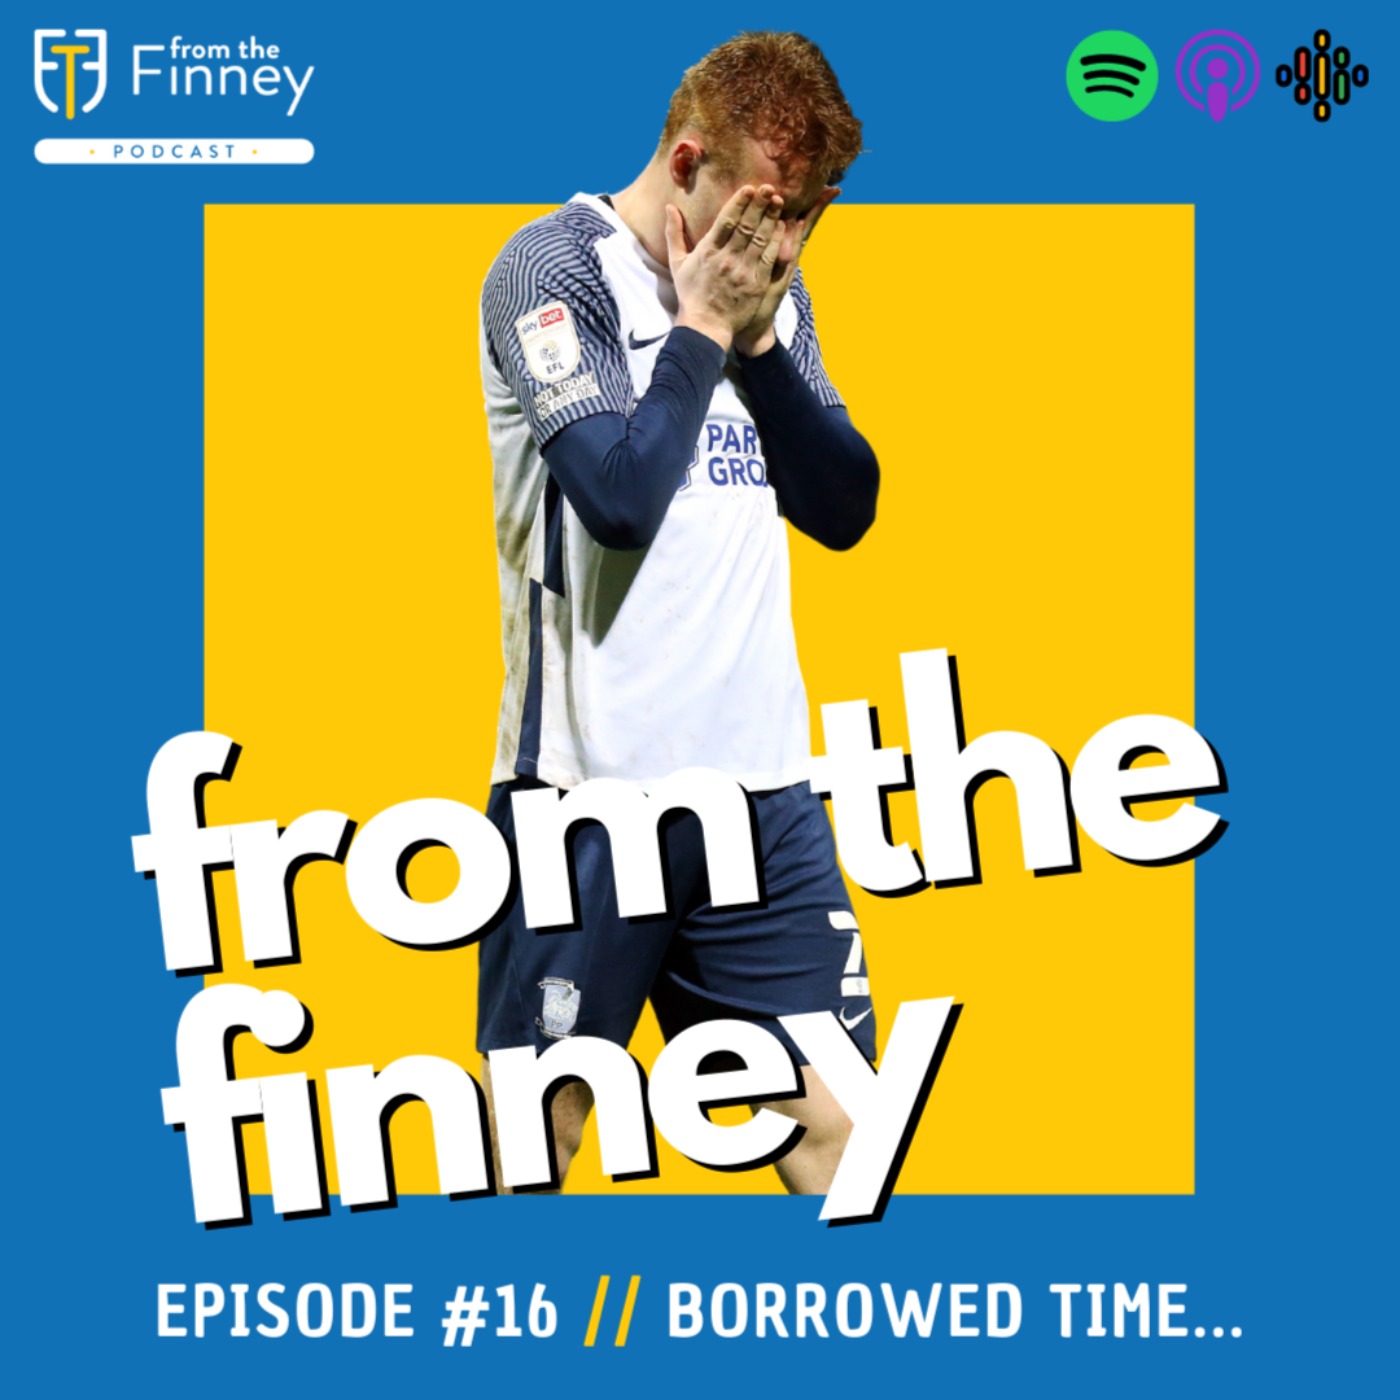 Episode #16 // Borrowed Time... // From the Finney Podcast